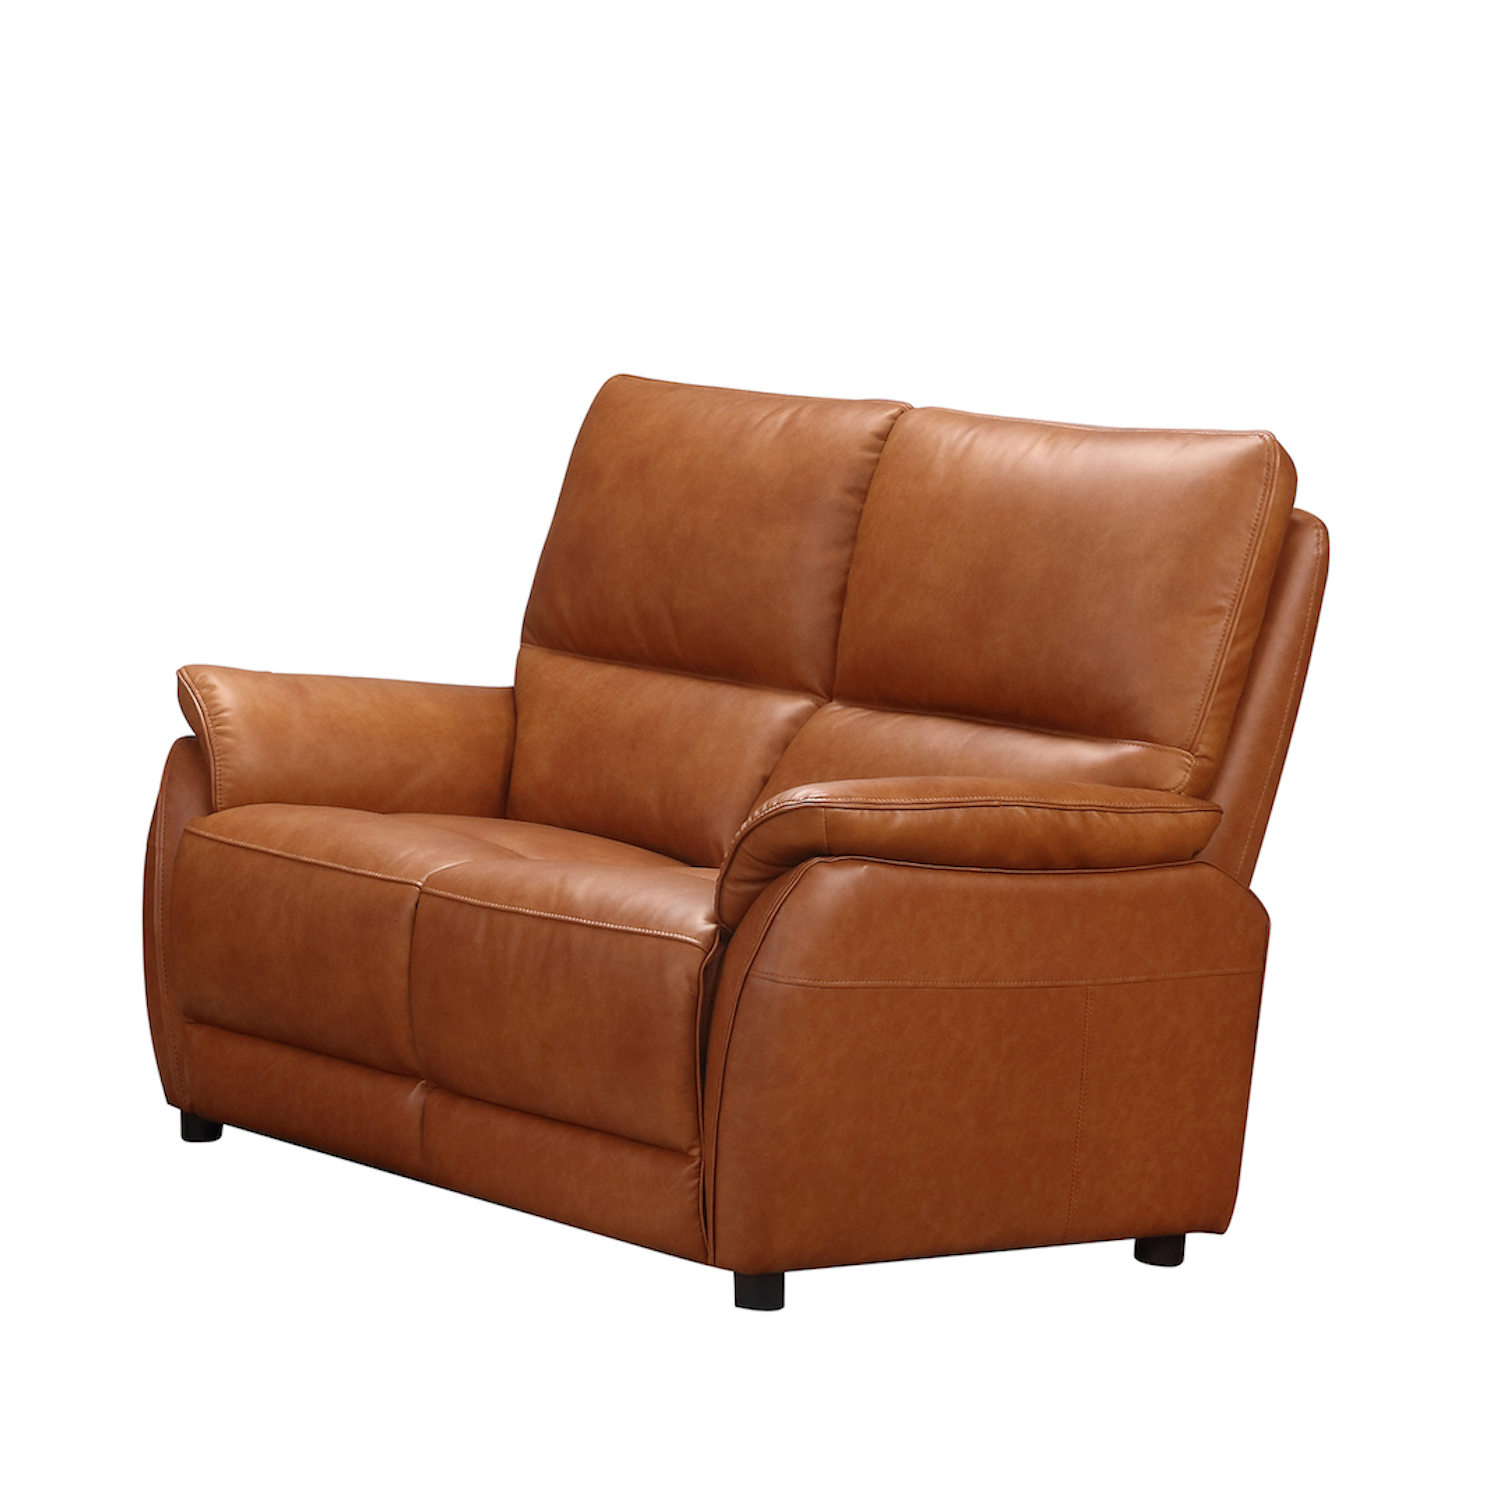 Esprit 2 Seater Power Recliner Tan Leather